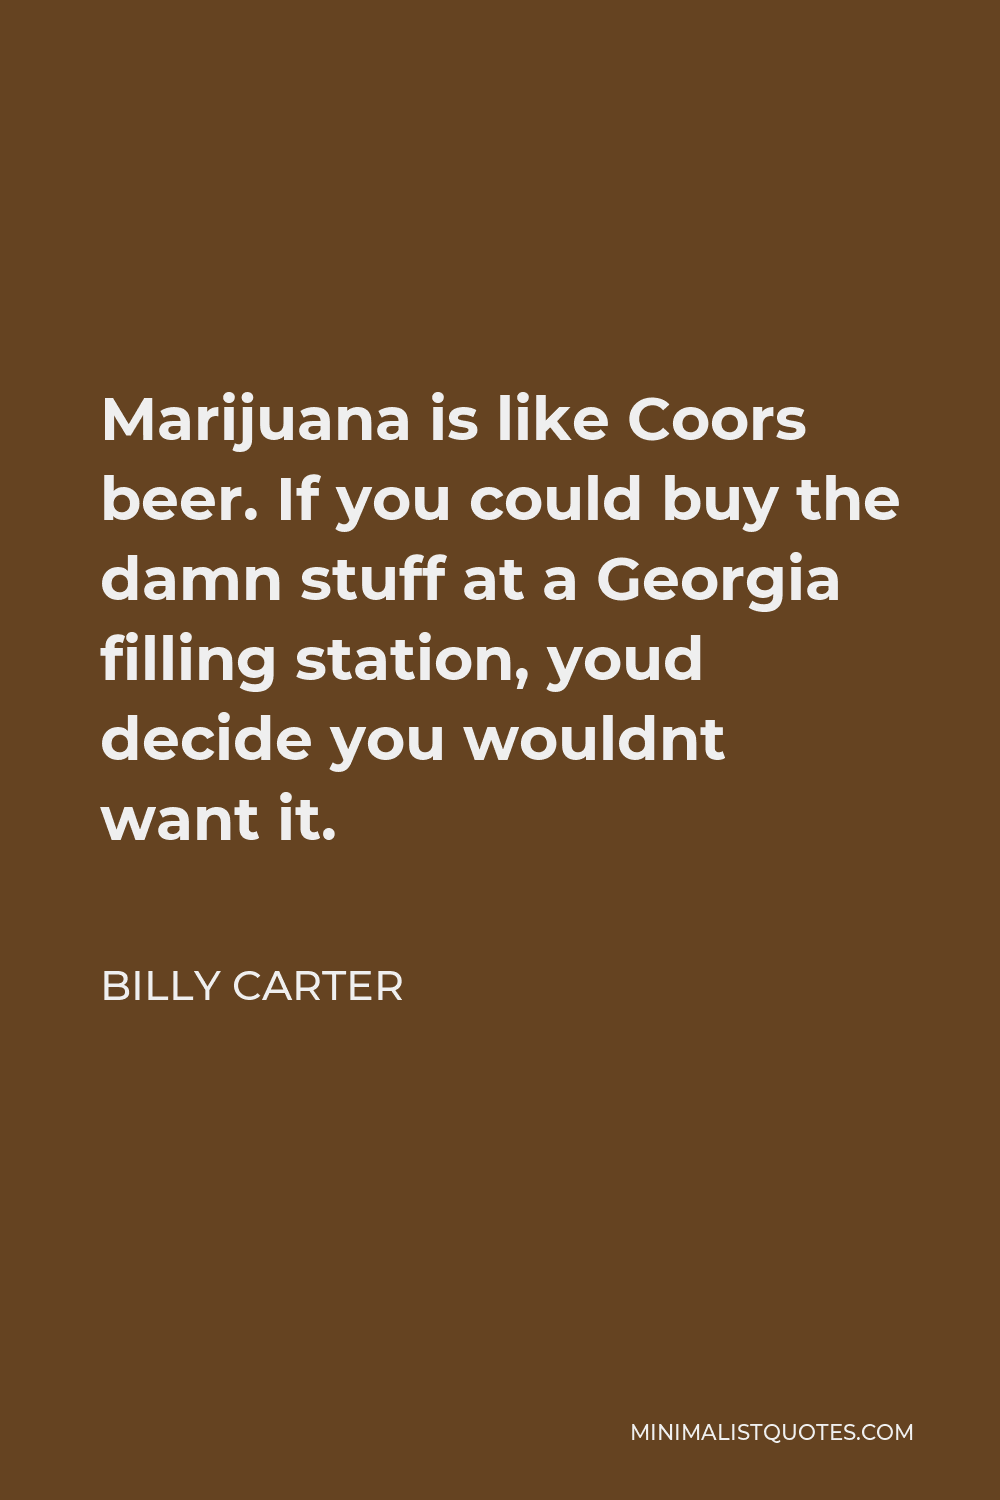 Billy Carter Quote - Marijuana is like Coors beer. If you could buy the damn stuff at a Georgia filling station, youd decide you wouldnt want it.